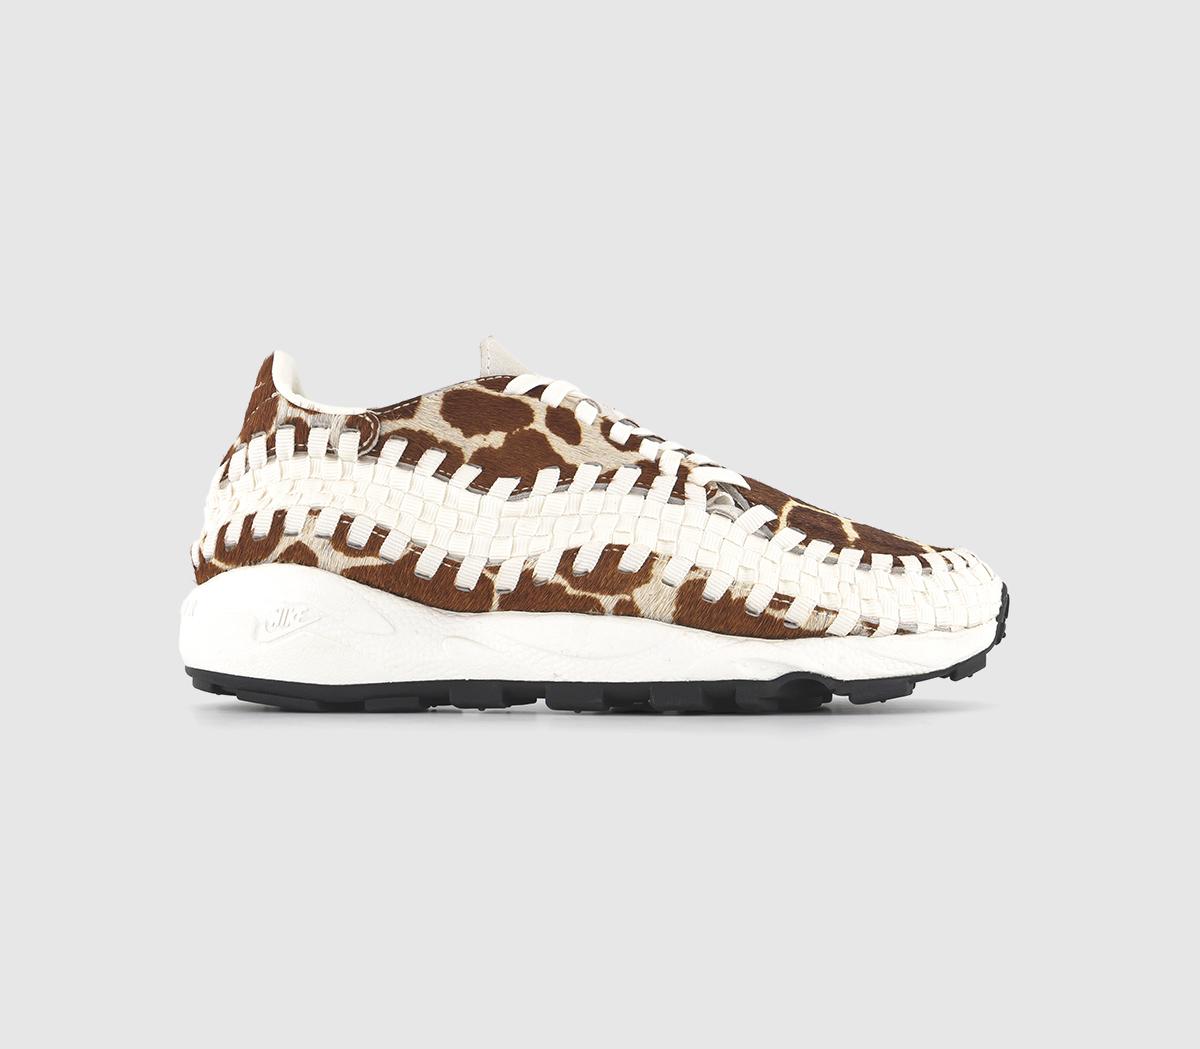 Nike Air Footscape Trainers Sail Black - Women's Trainers